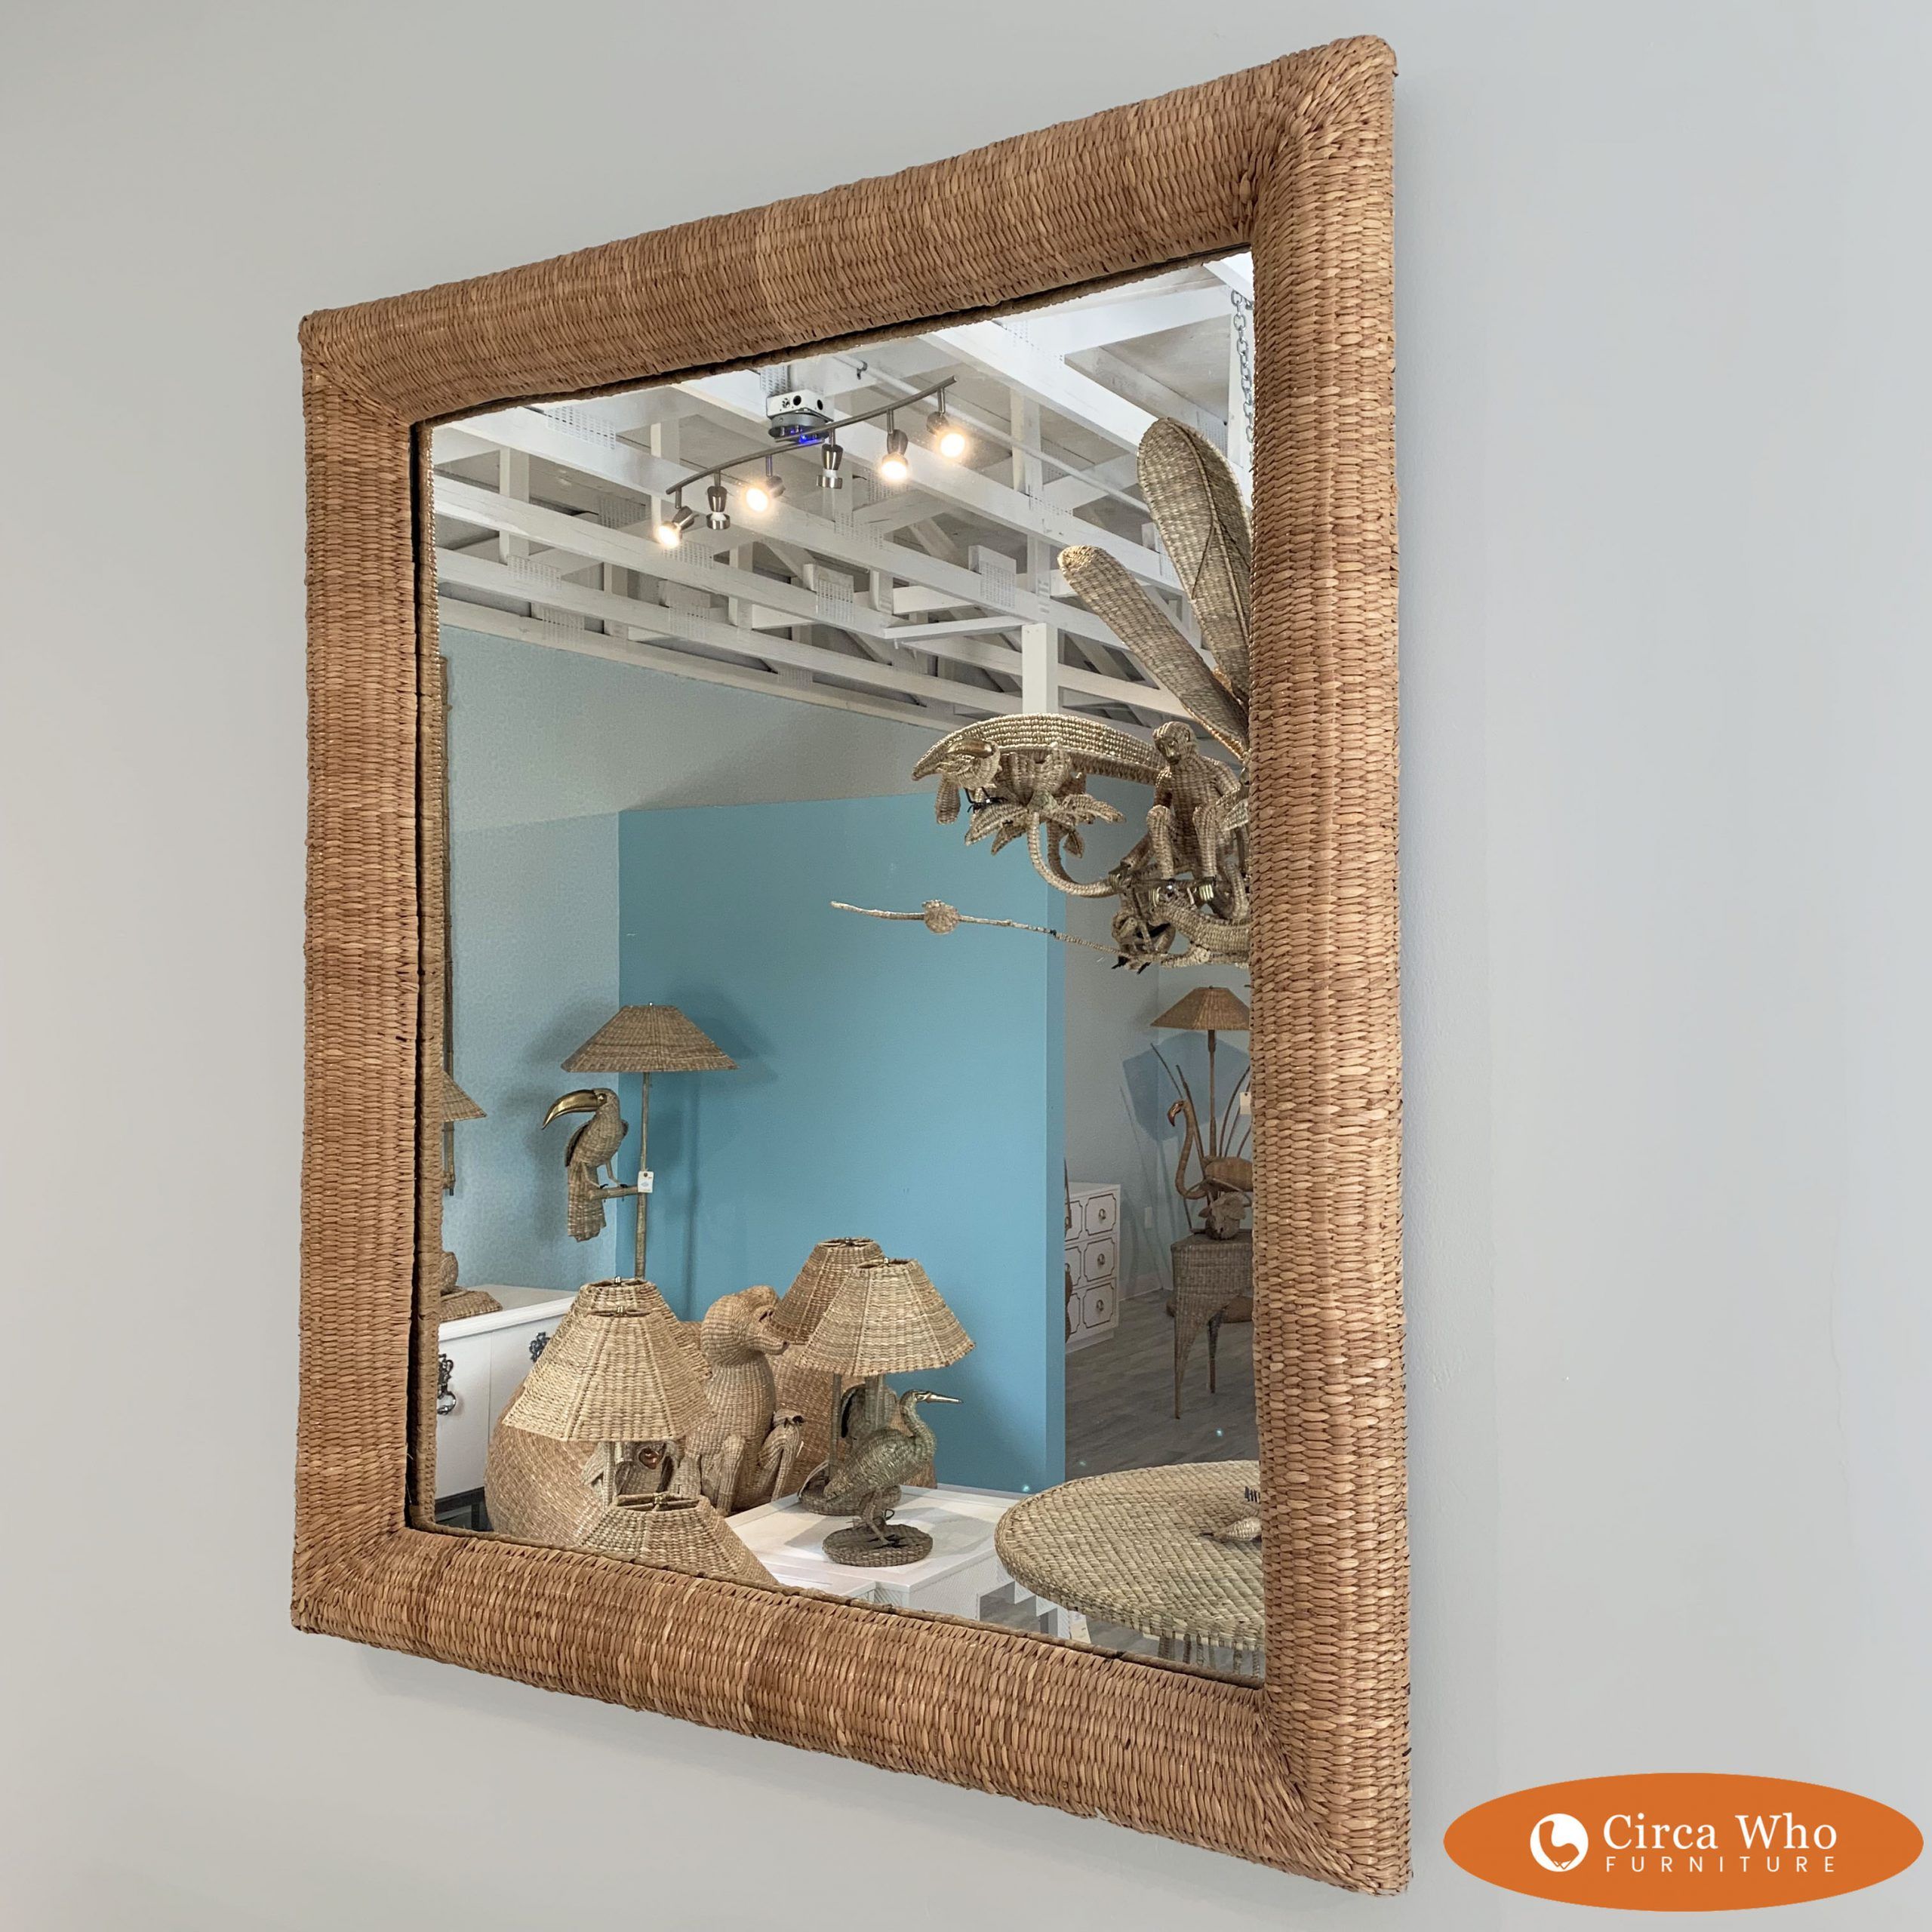 Wrapped Rattan Mirror Mario Lopez Torres | Circa Who In Rattan Wrapped Wall Mirrors (View 3 of 15)